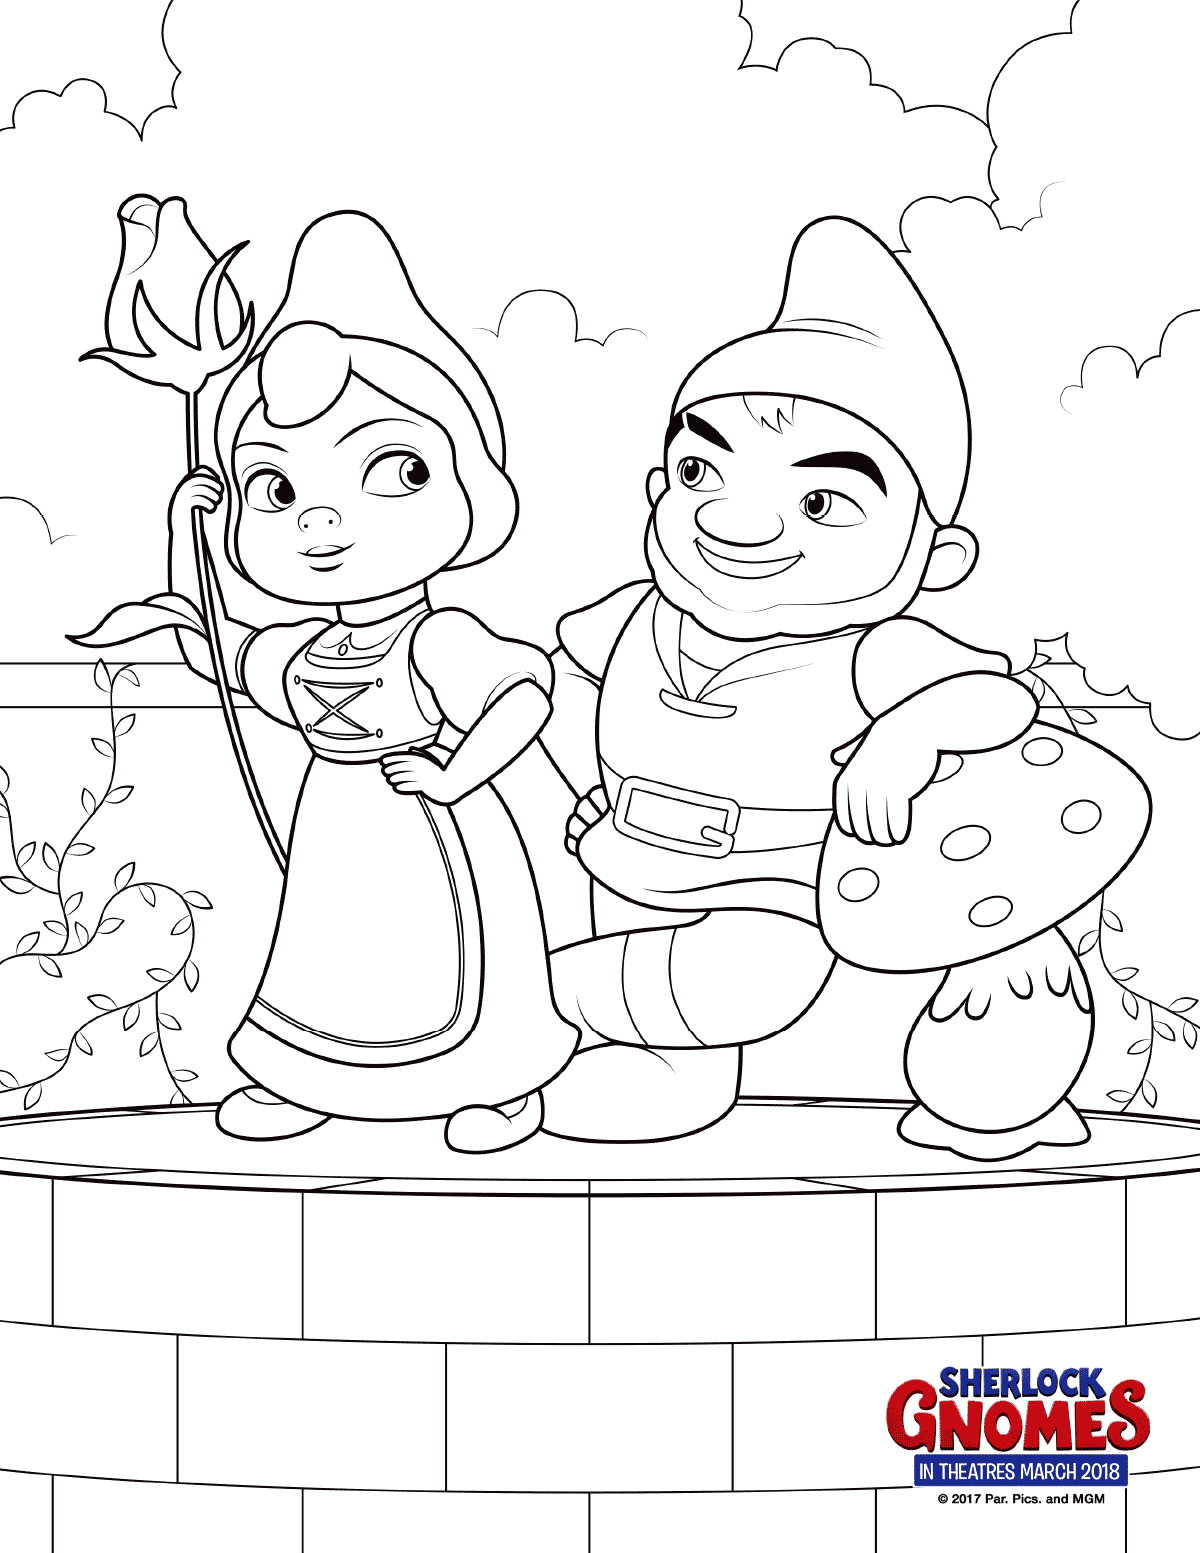 Sherlock Gnomes Coloring Pages Gnomeo and Juliet